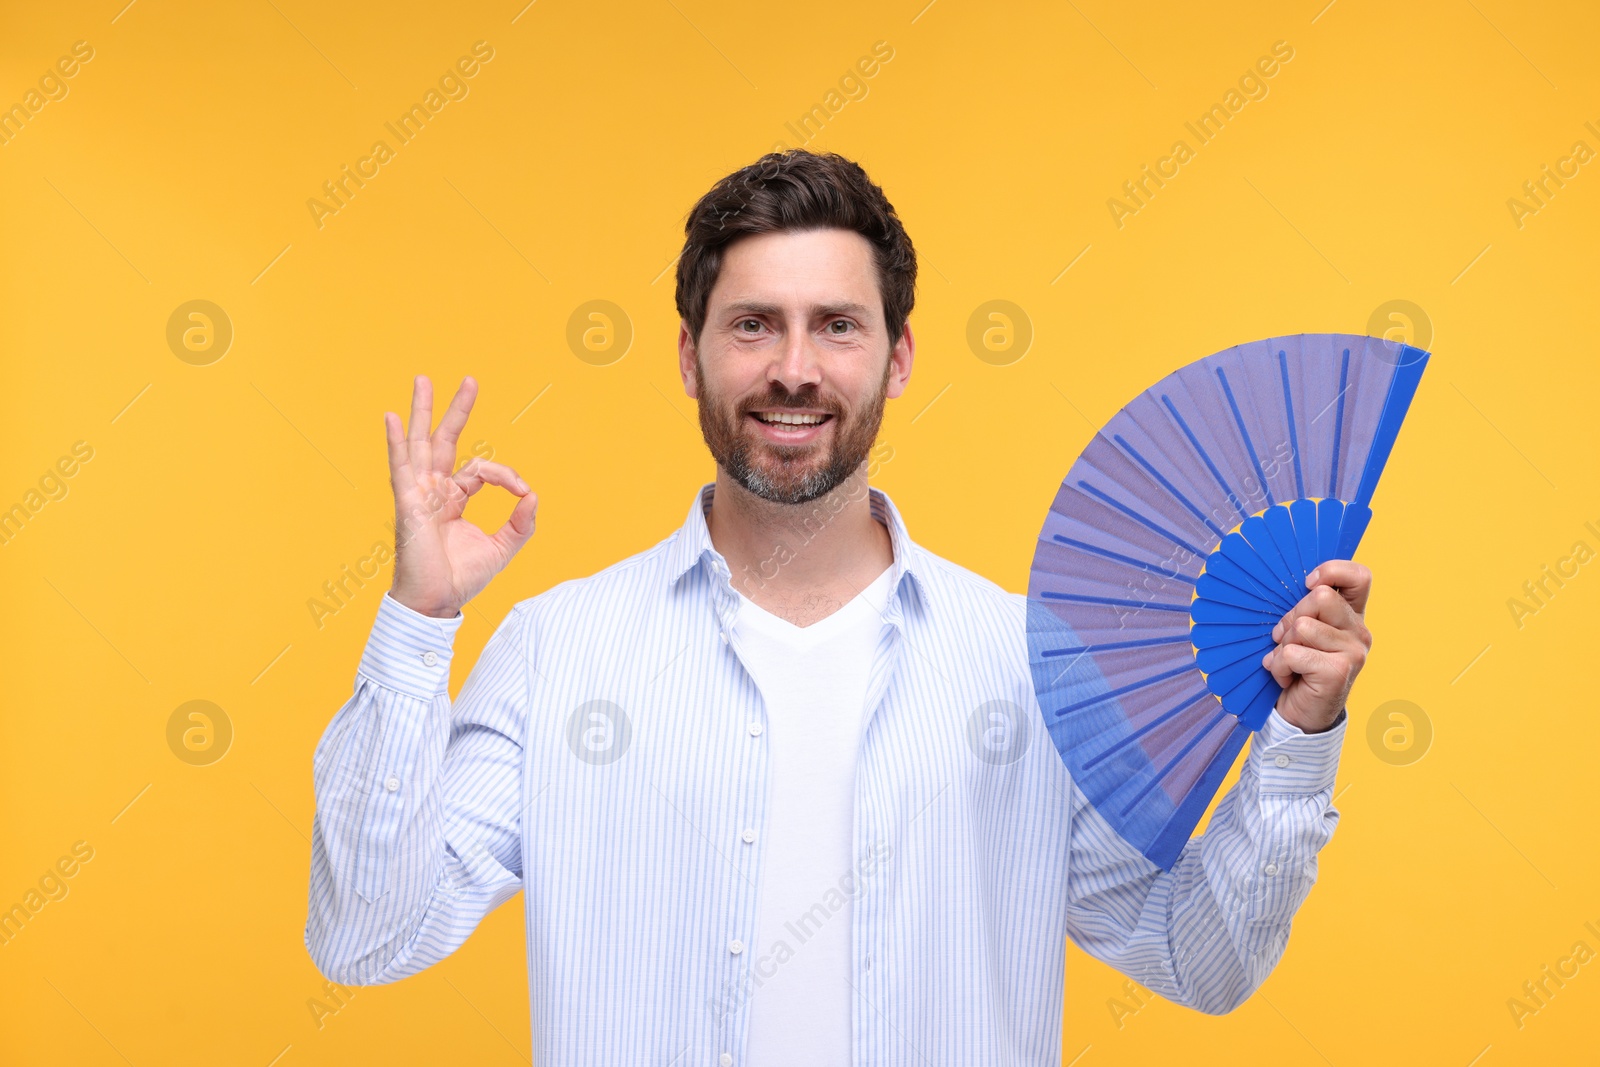 Photo of Happy man holding hand fan and showing ok gesture on orange background